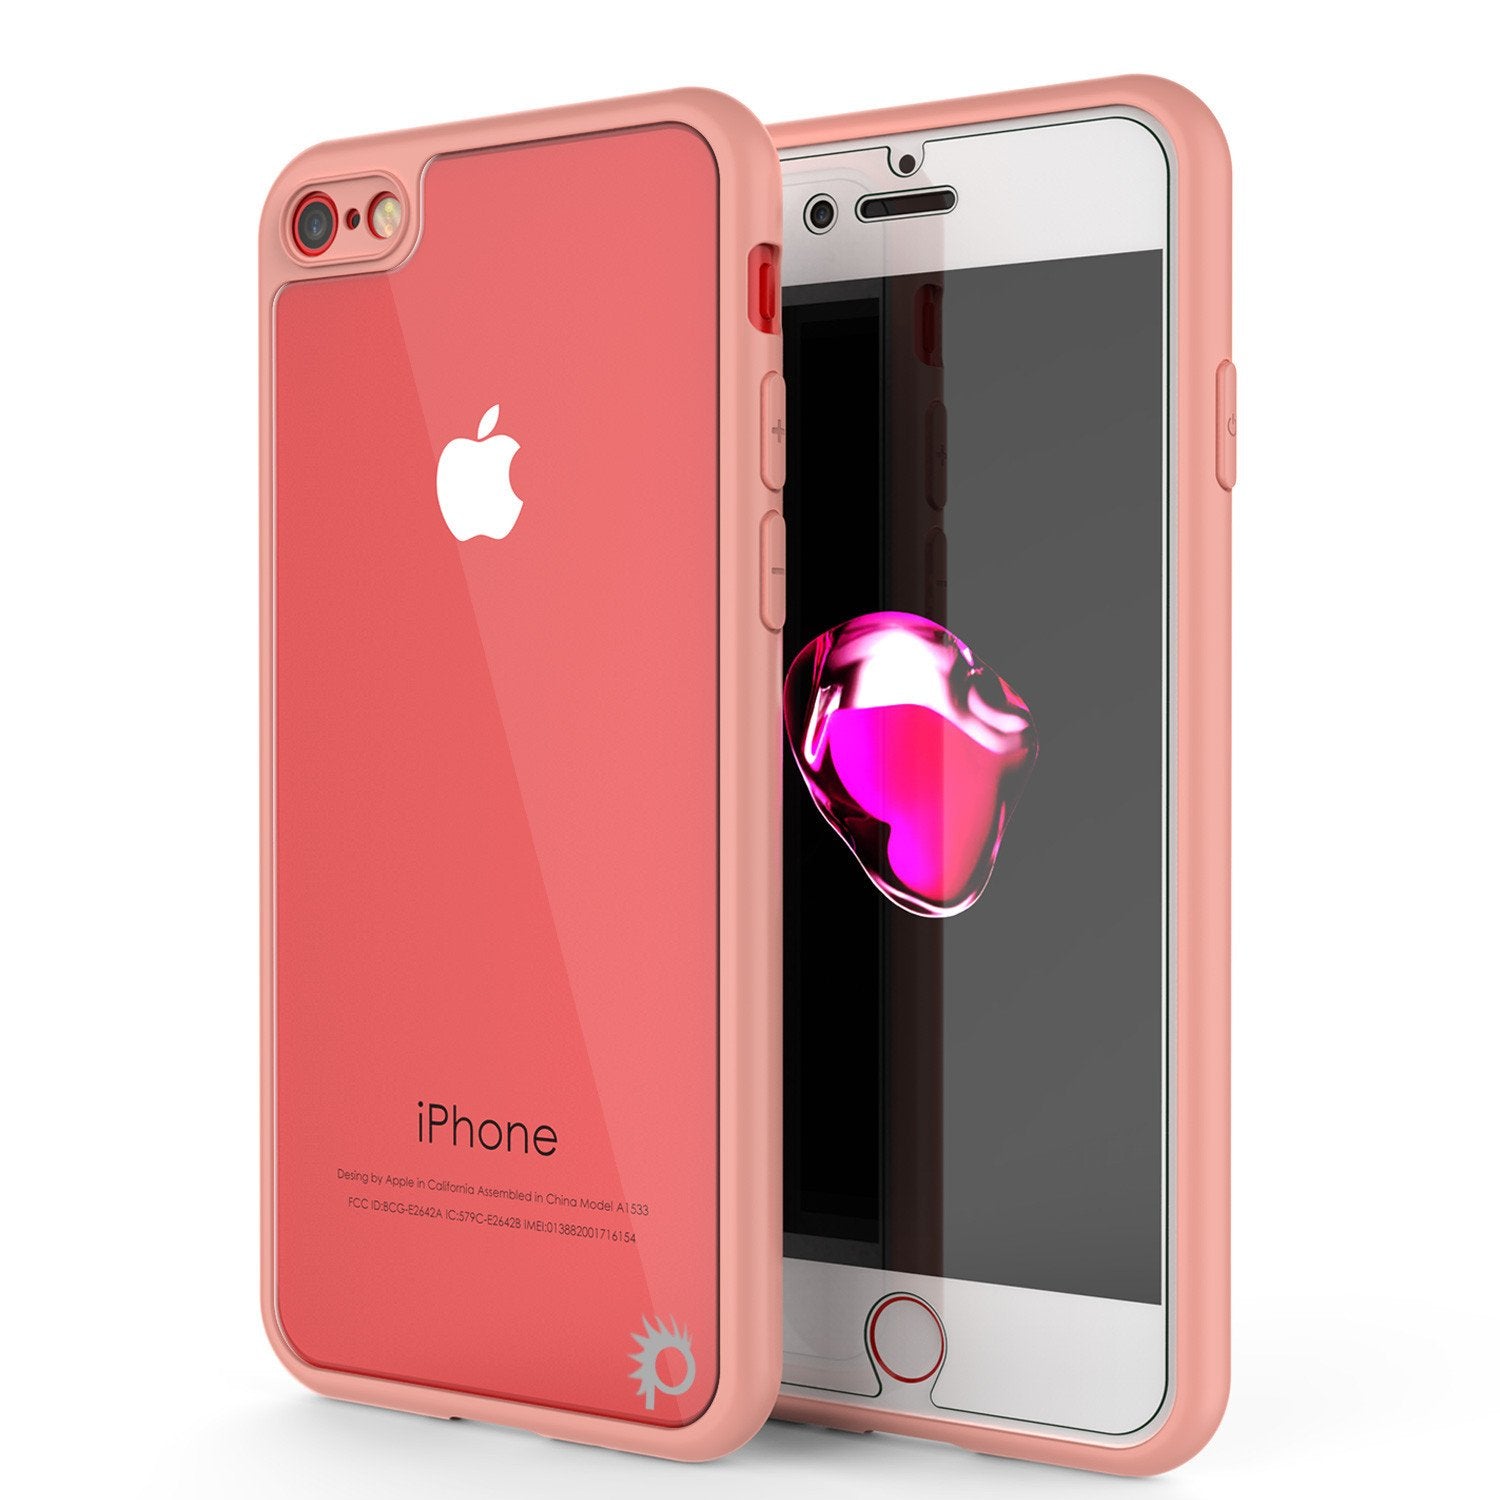 iPhone 7 Case [MASK Series] [PINK] Full Body Hybrid Dual Layer TPU Cover W/ protective Tempered Glass Screen Protector - PunkCase NZ